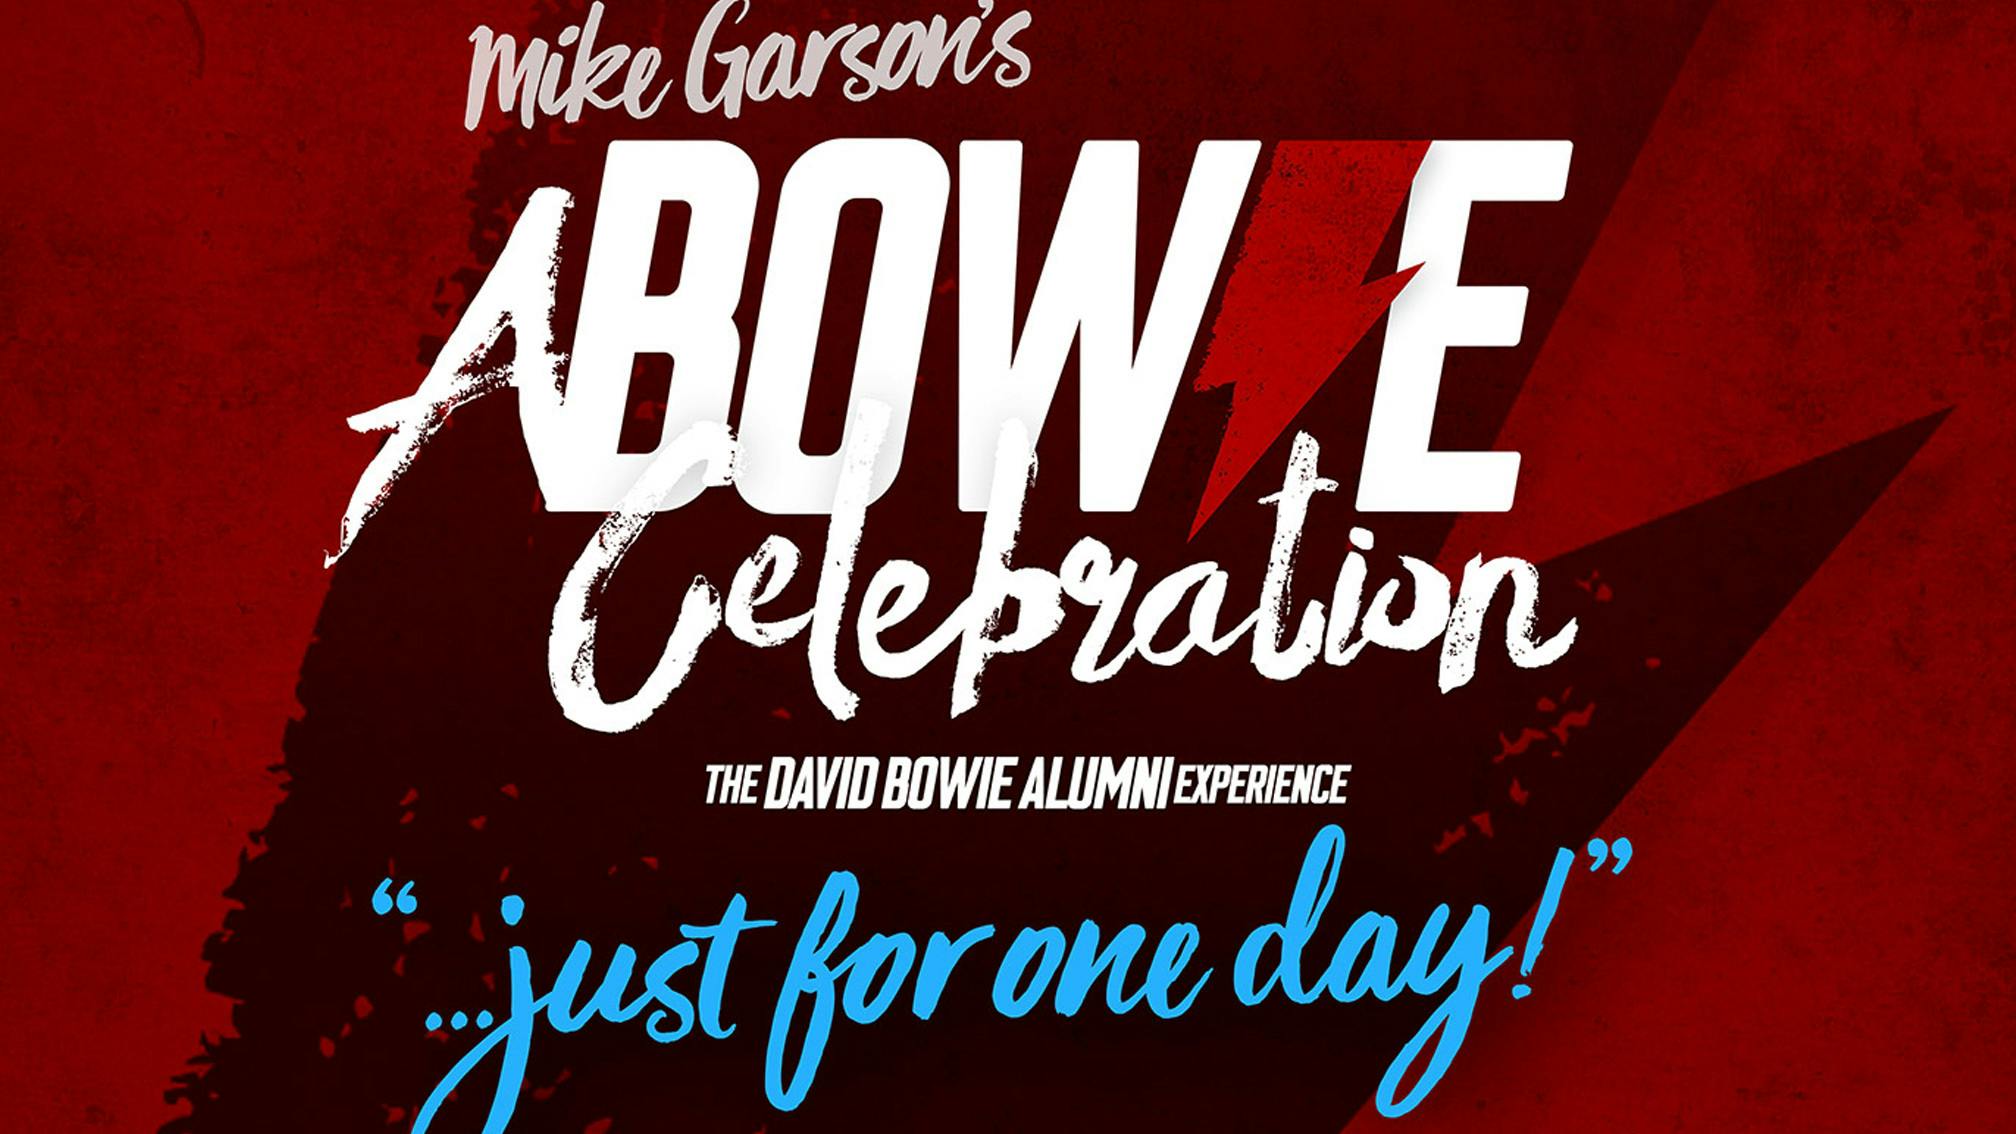 Corey Taylor, Taylor Hawkins, Dave Navarro and more join A Bowie Celebration: Just For One Day! stream